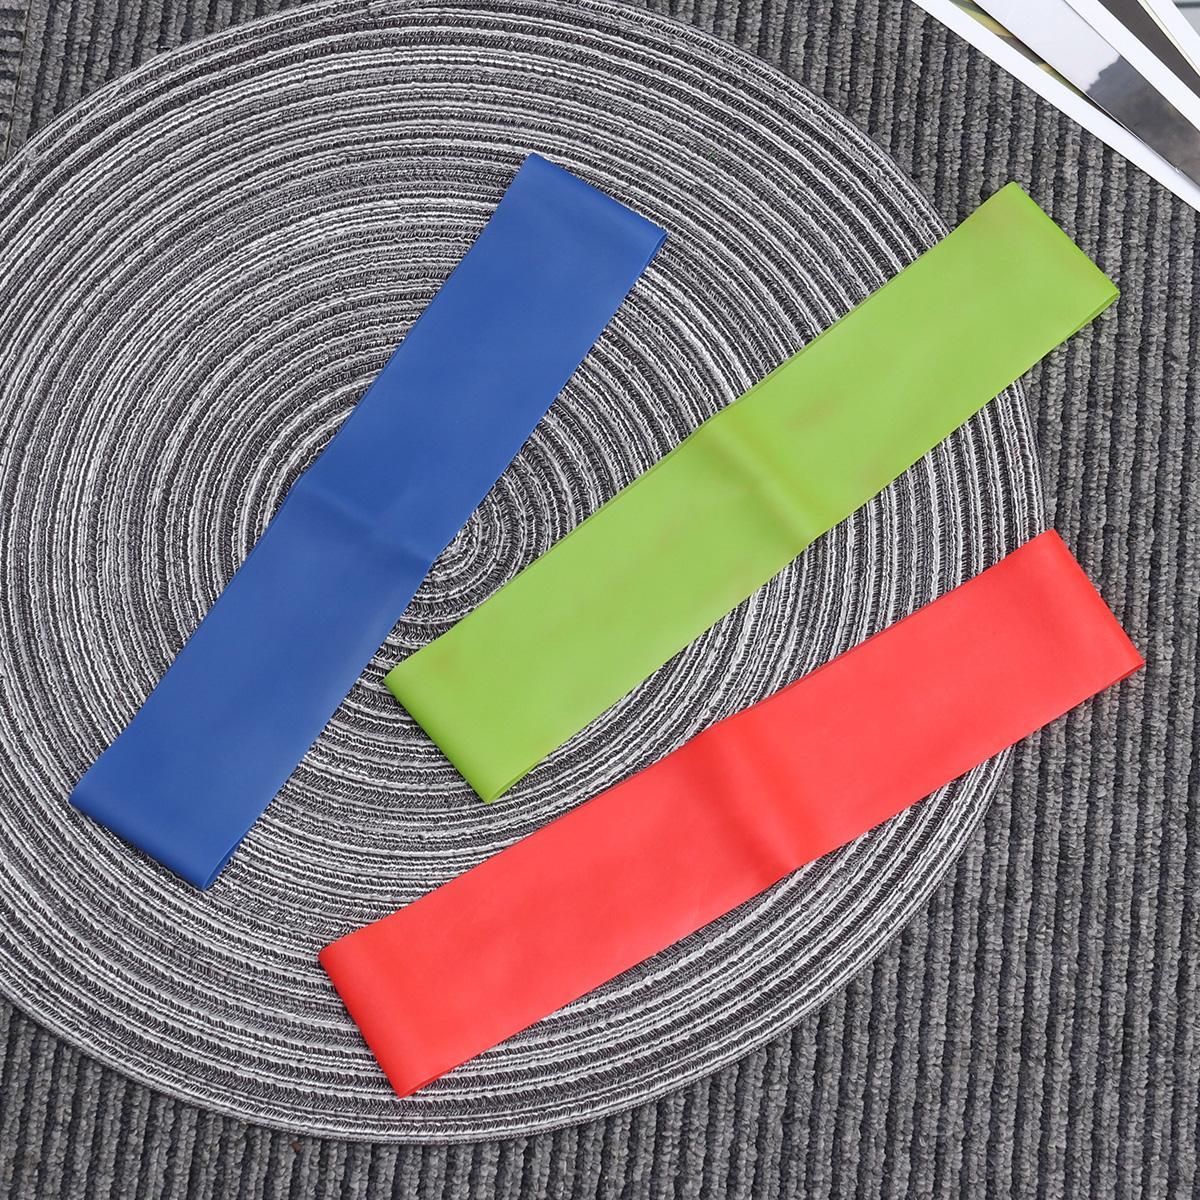 3PCS Natural Latex Elastic Workout Loop Bands Best for Pilates Yoga Rehab Physical Therapy (Three Colors)